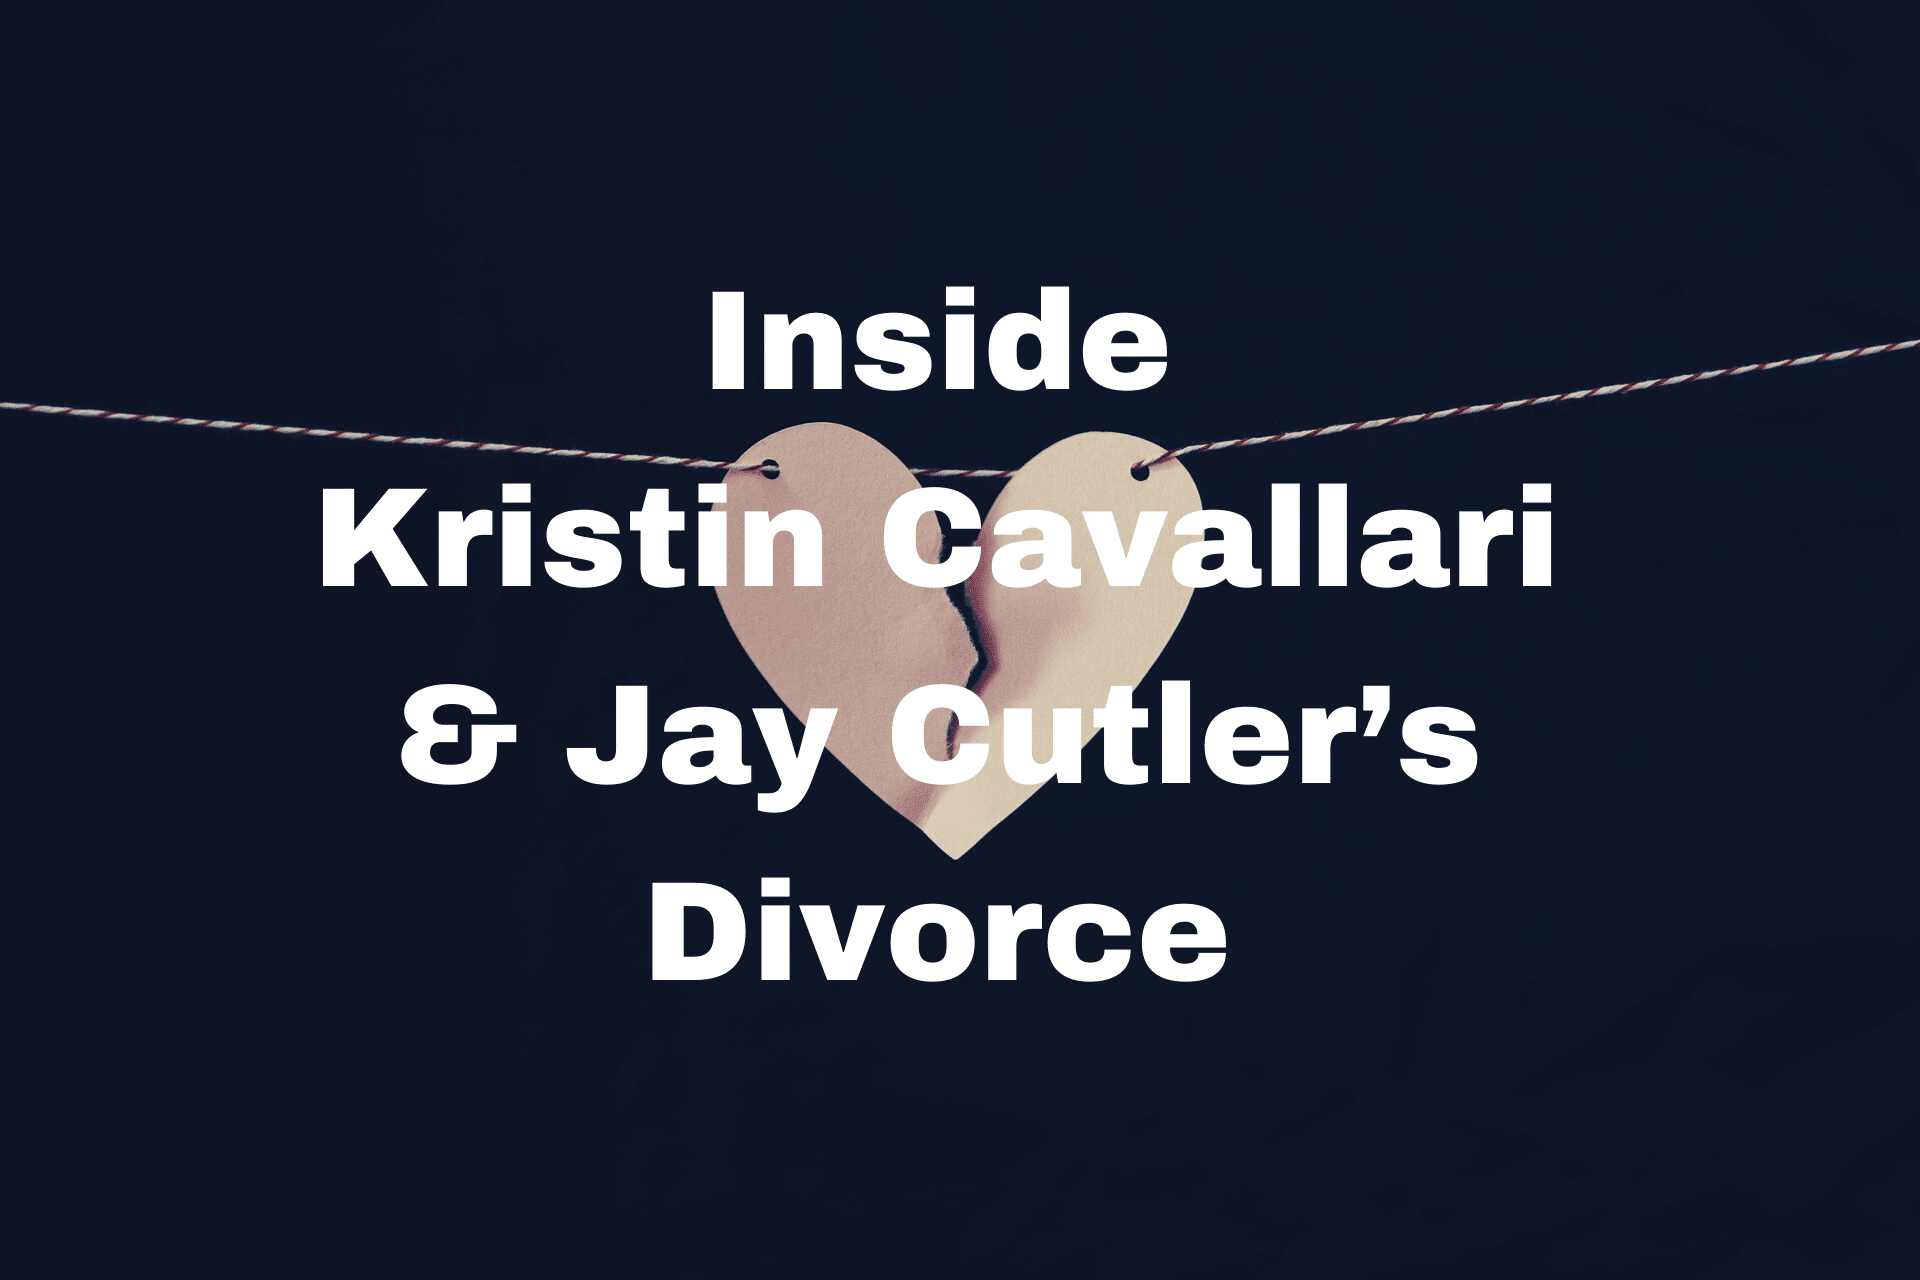 Stock photo with text: "Inside Kristin Cavallari and Jay Cutler’s Divorce"